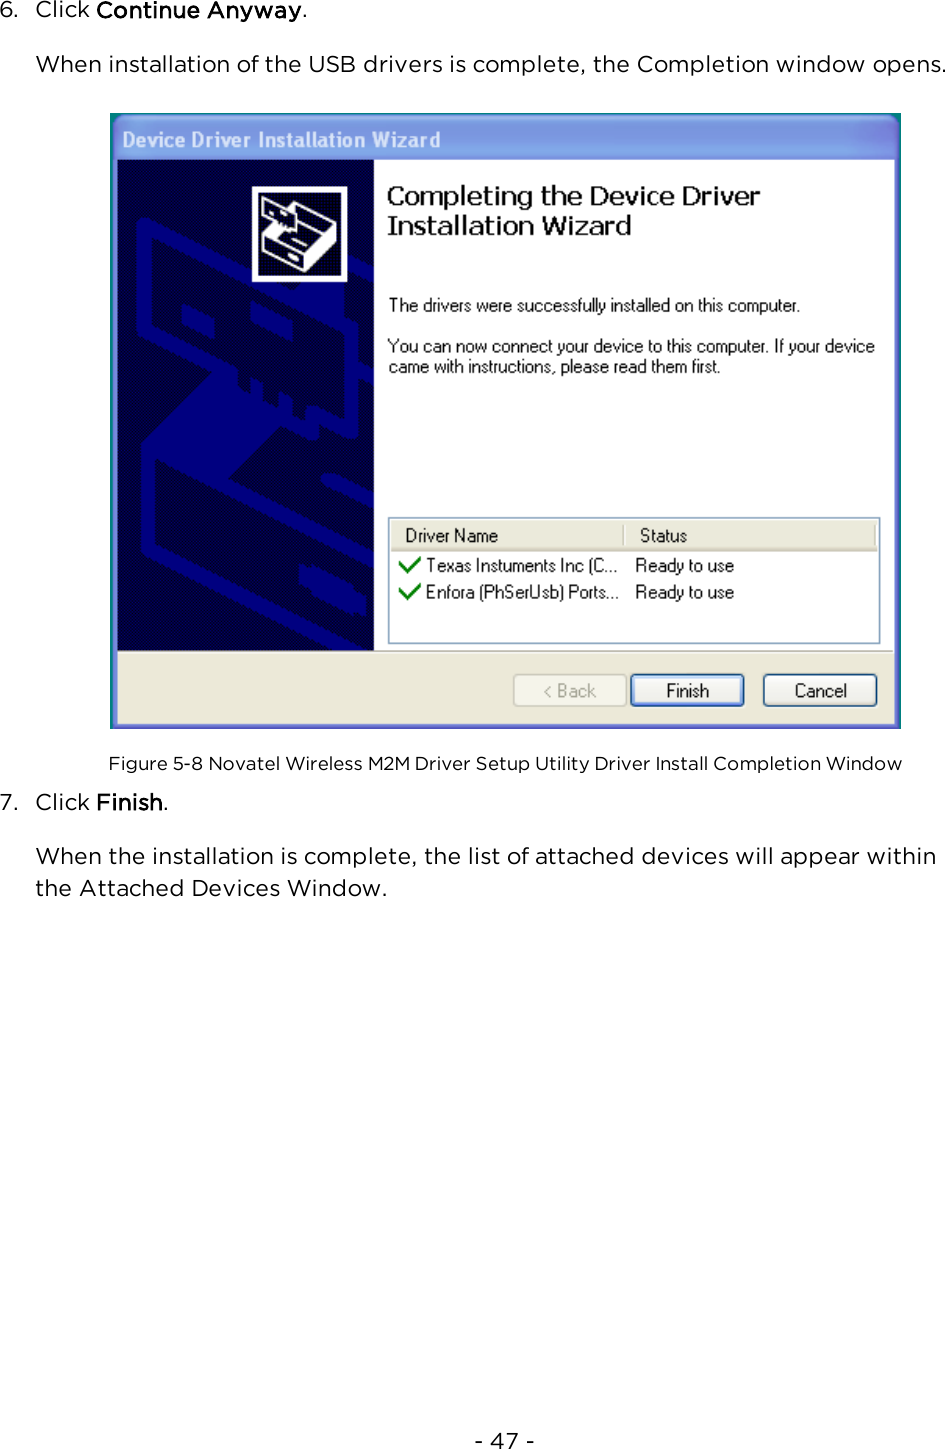 - 47 -6. Click Continue Anyway.When installation of the USB drivers is complete, the Completion window opens.Figure 5-8 Novatel Wireless M2M Driver Setup Utility Driver Install Completion Window7. Click Finish.When the installation is complete, the list of attached devices will appear withinthe Attached Devices Window.